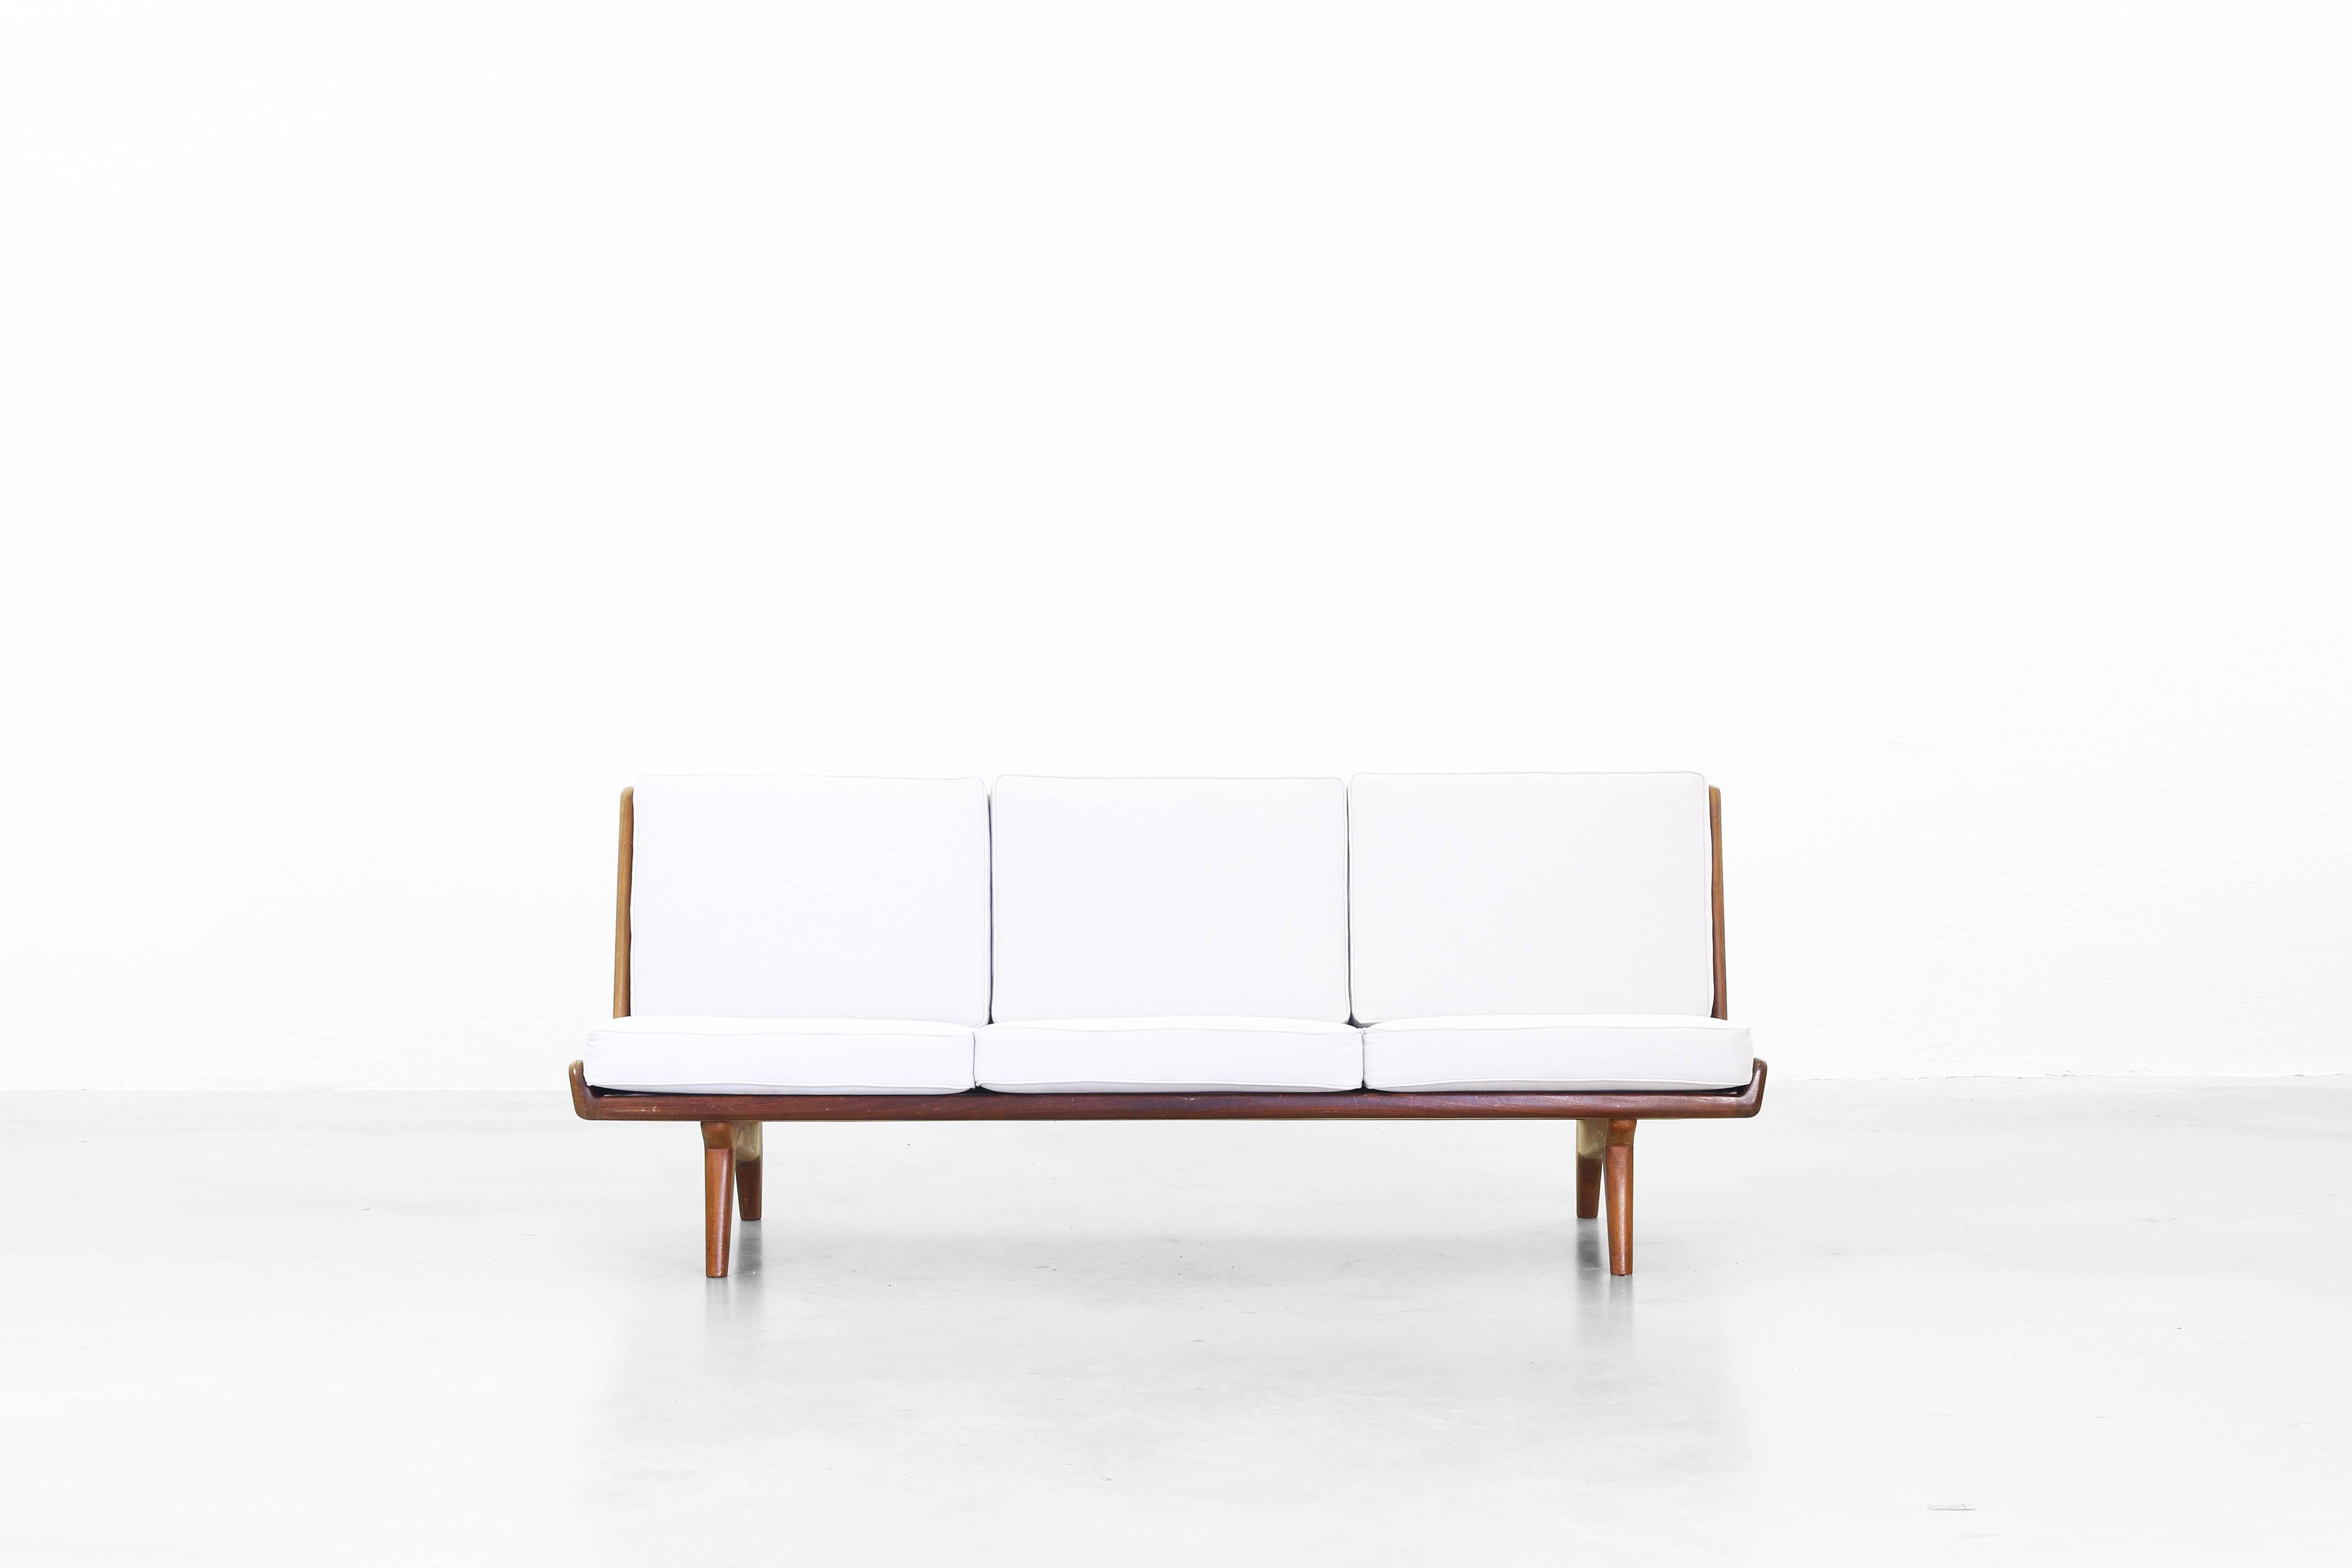 Very beautiful sofa designed by Carl Gustaf Hiort af Ornäs, Sweden in 1950. The sofa is in a very good condition. The cushions were newly reupholstered with a high quality fabric by 